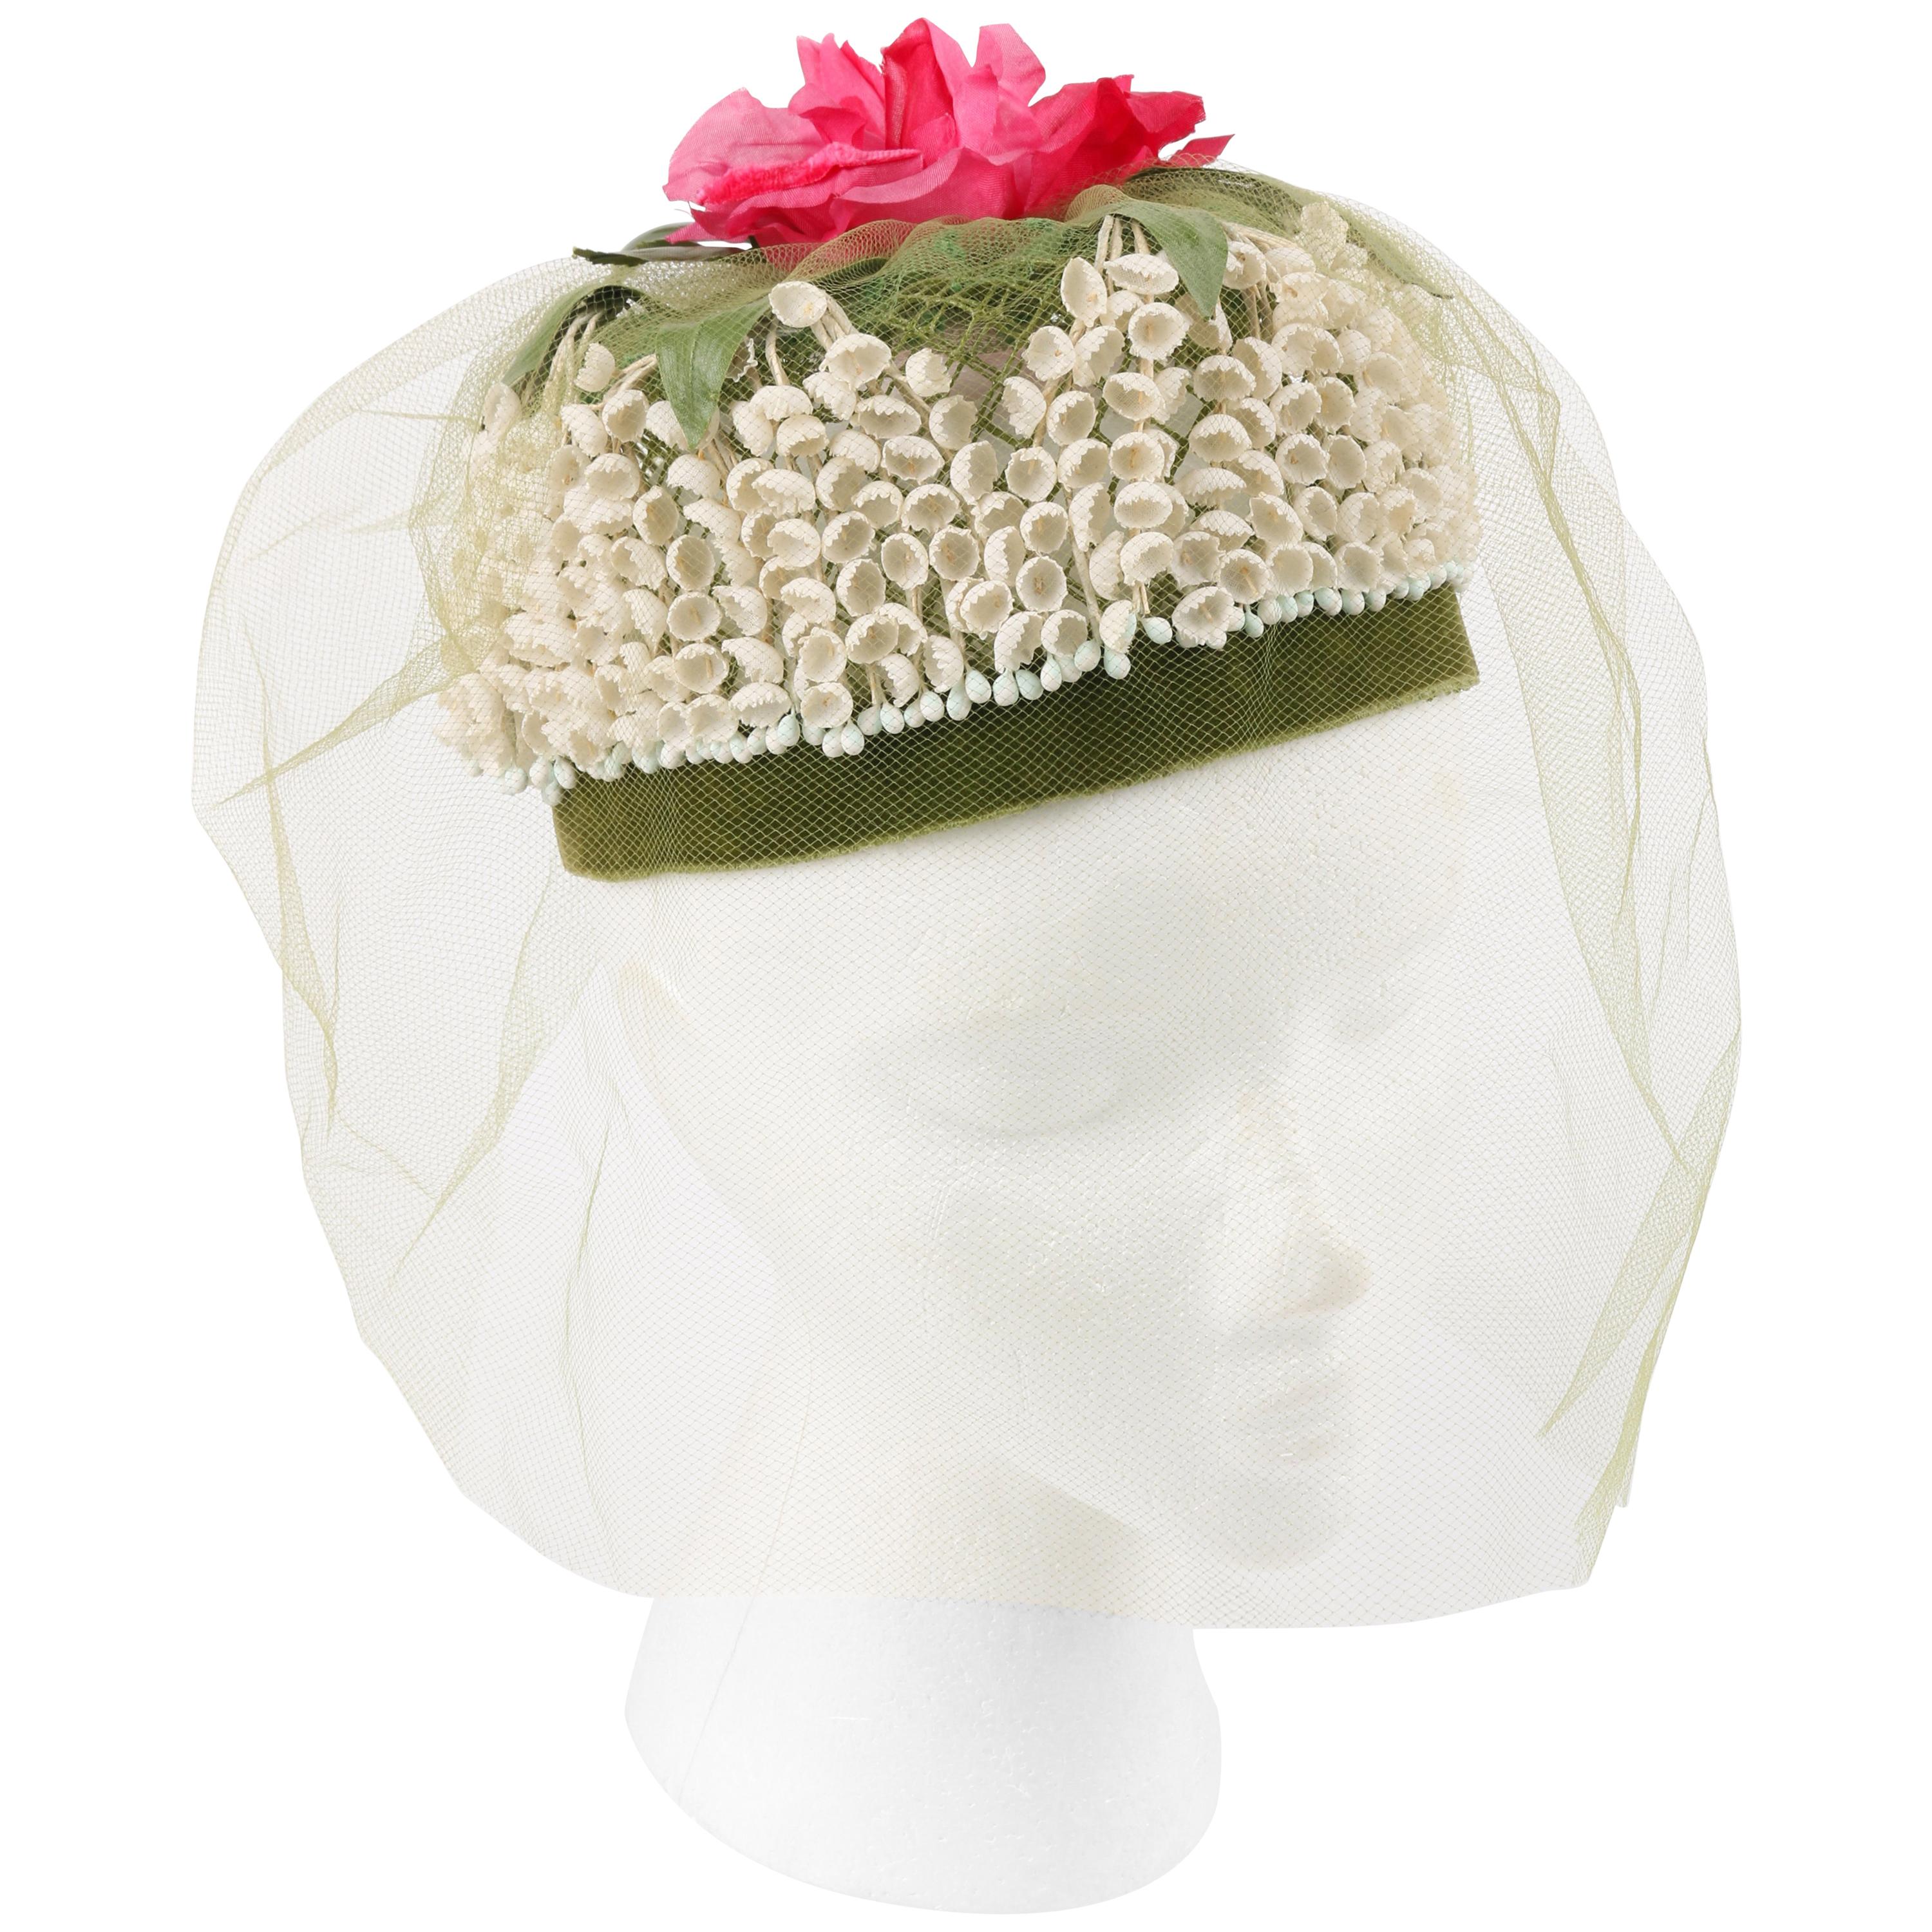 MISS FEIGE c.1960's Lily of the Valley Veiled Floral Garden Party Pillbox Hat